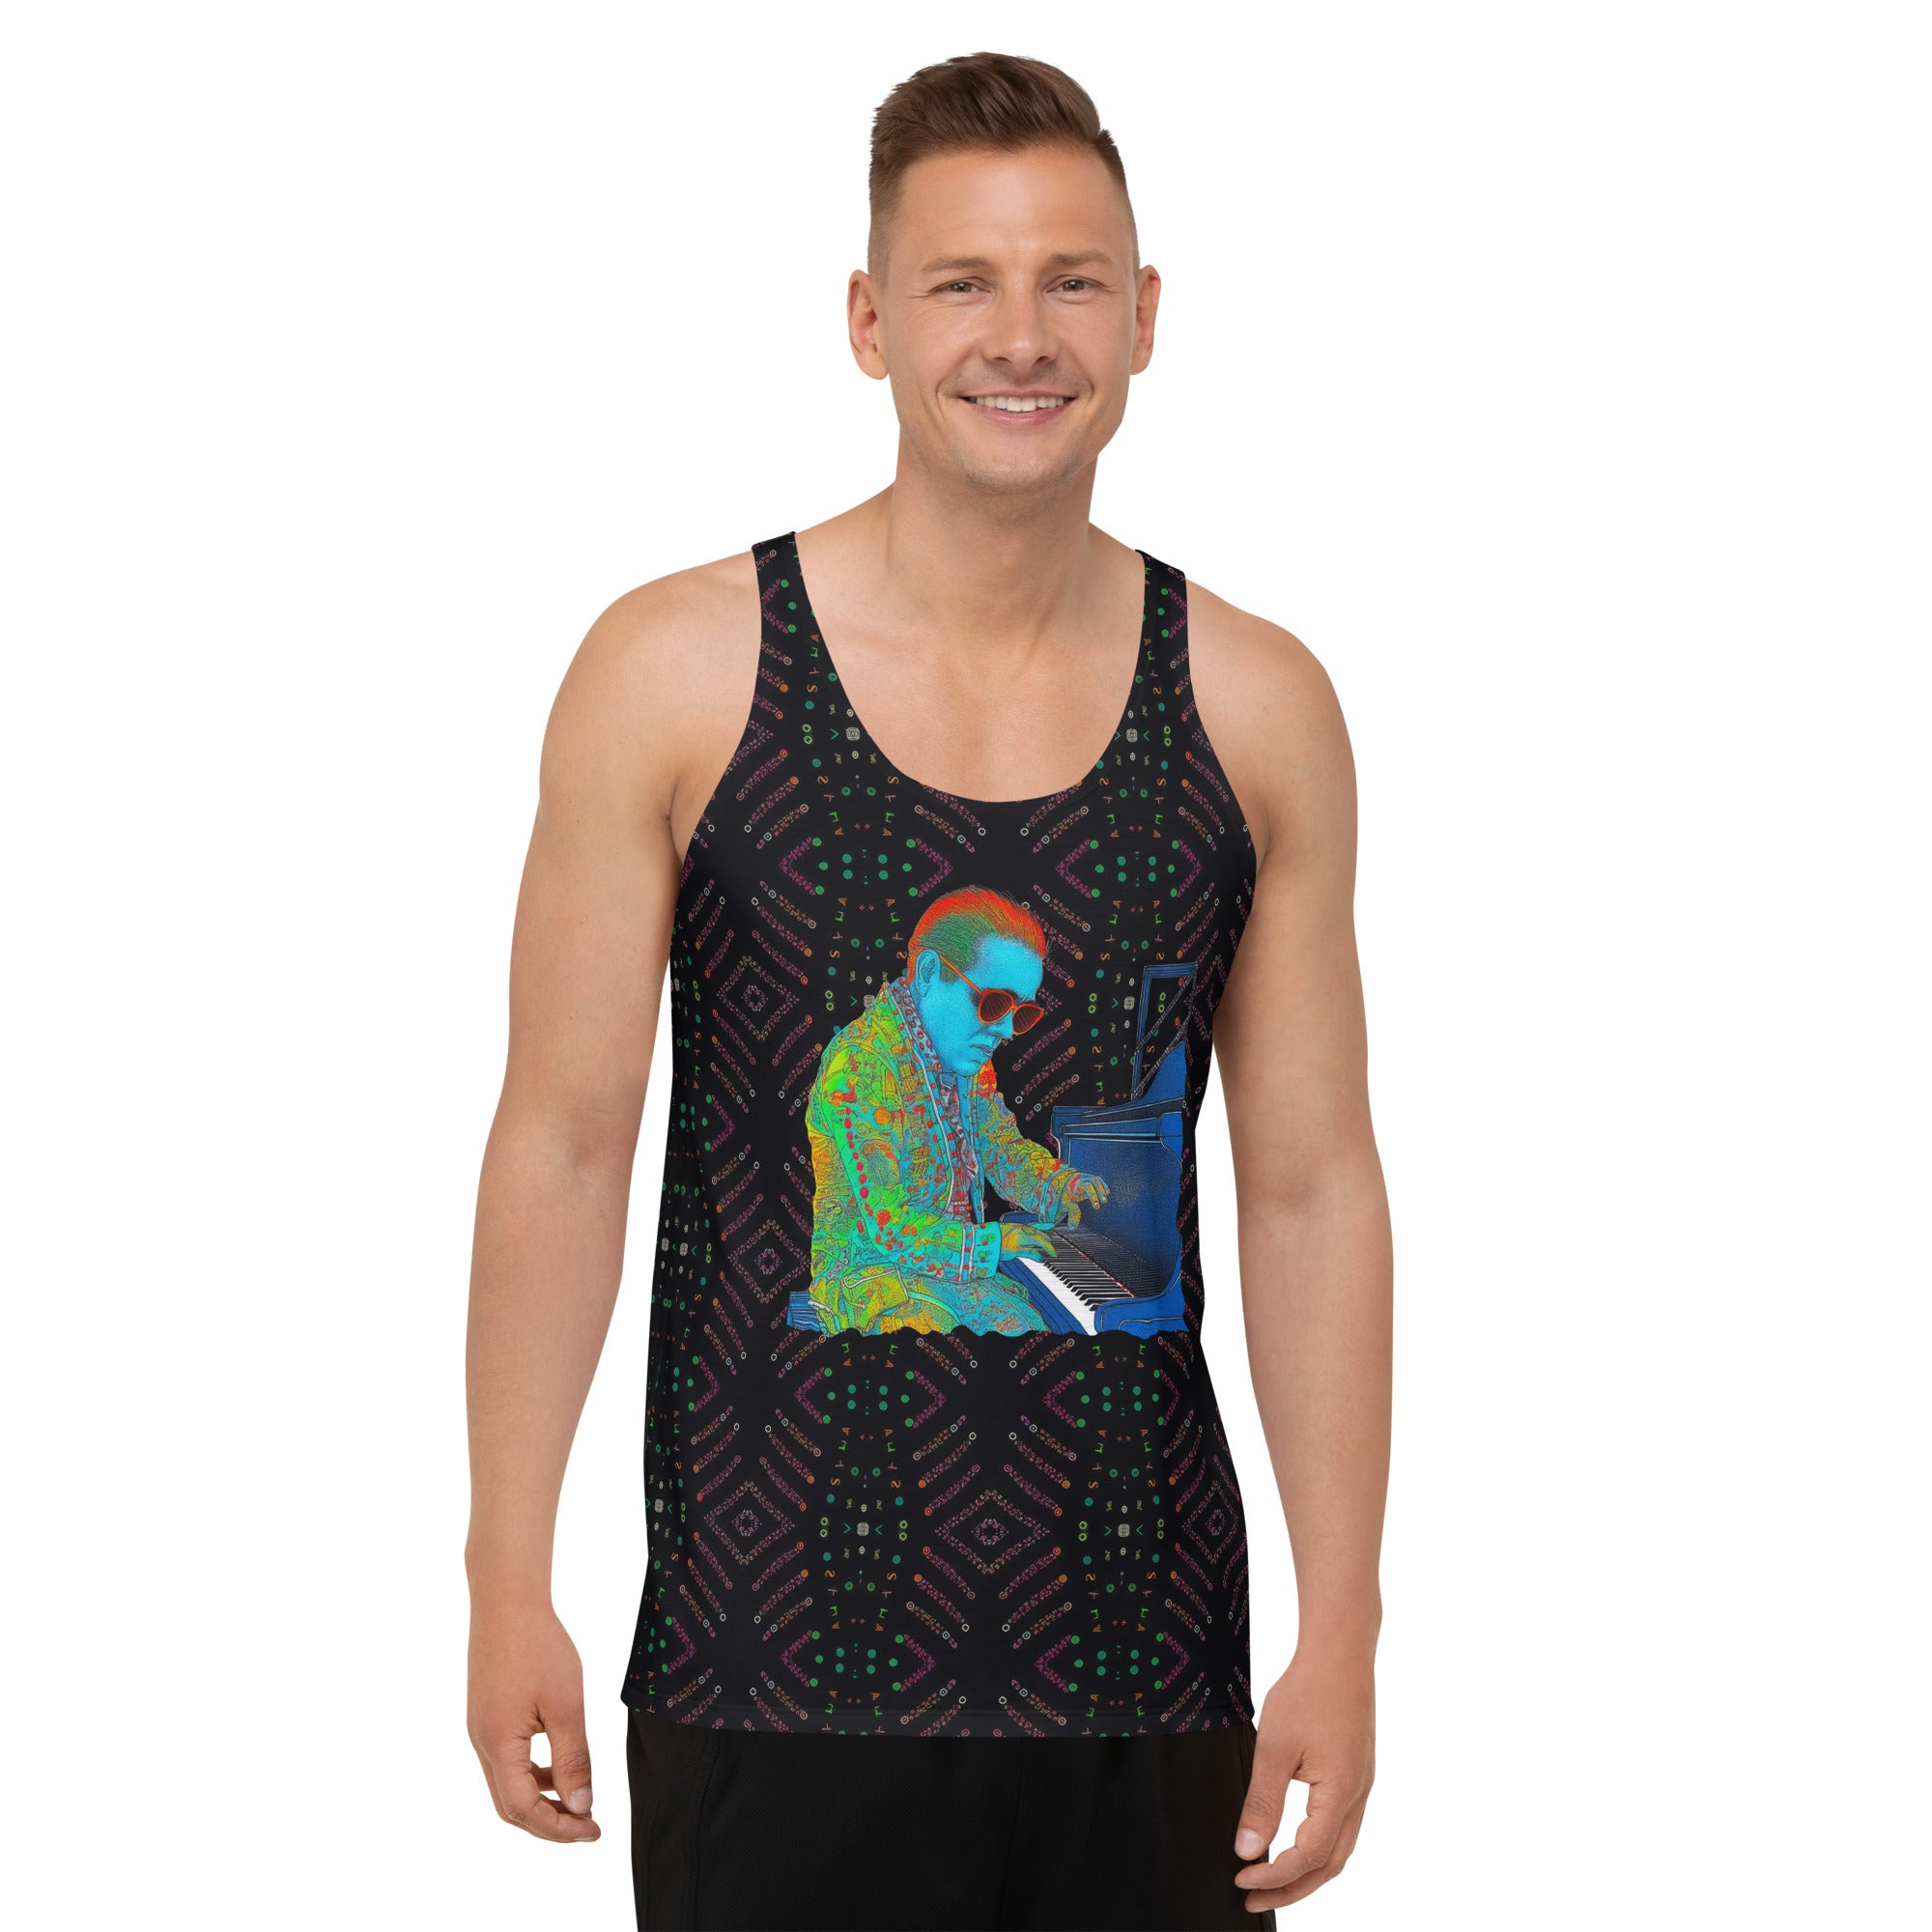 Vibrant sketch pattern on men's tank top in bright colors.